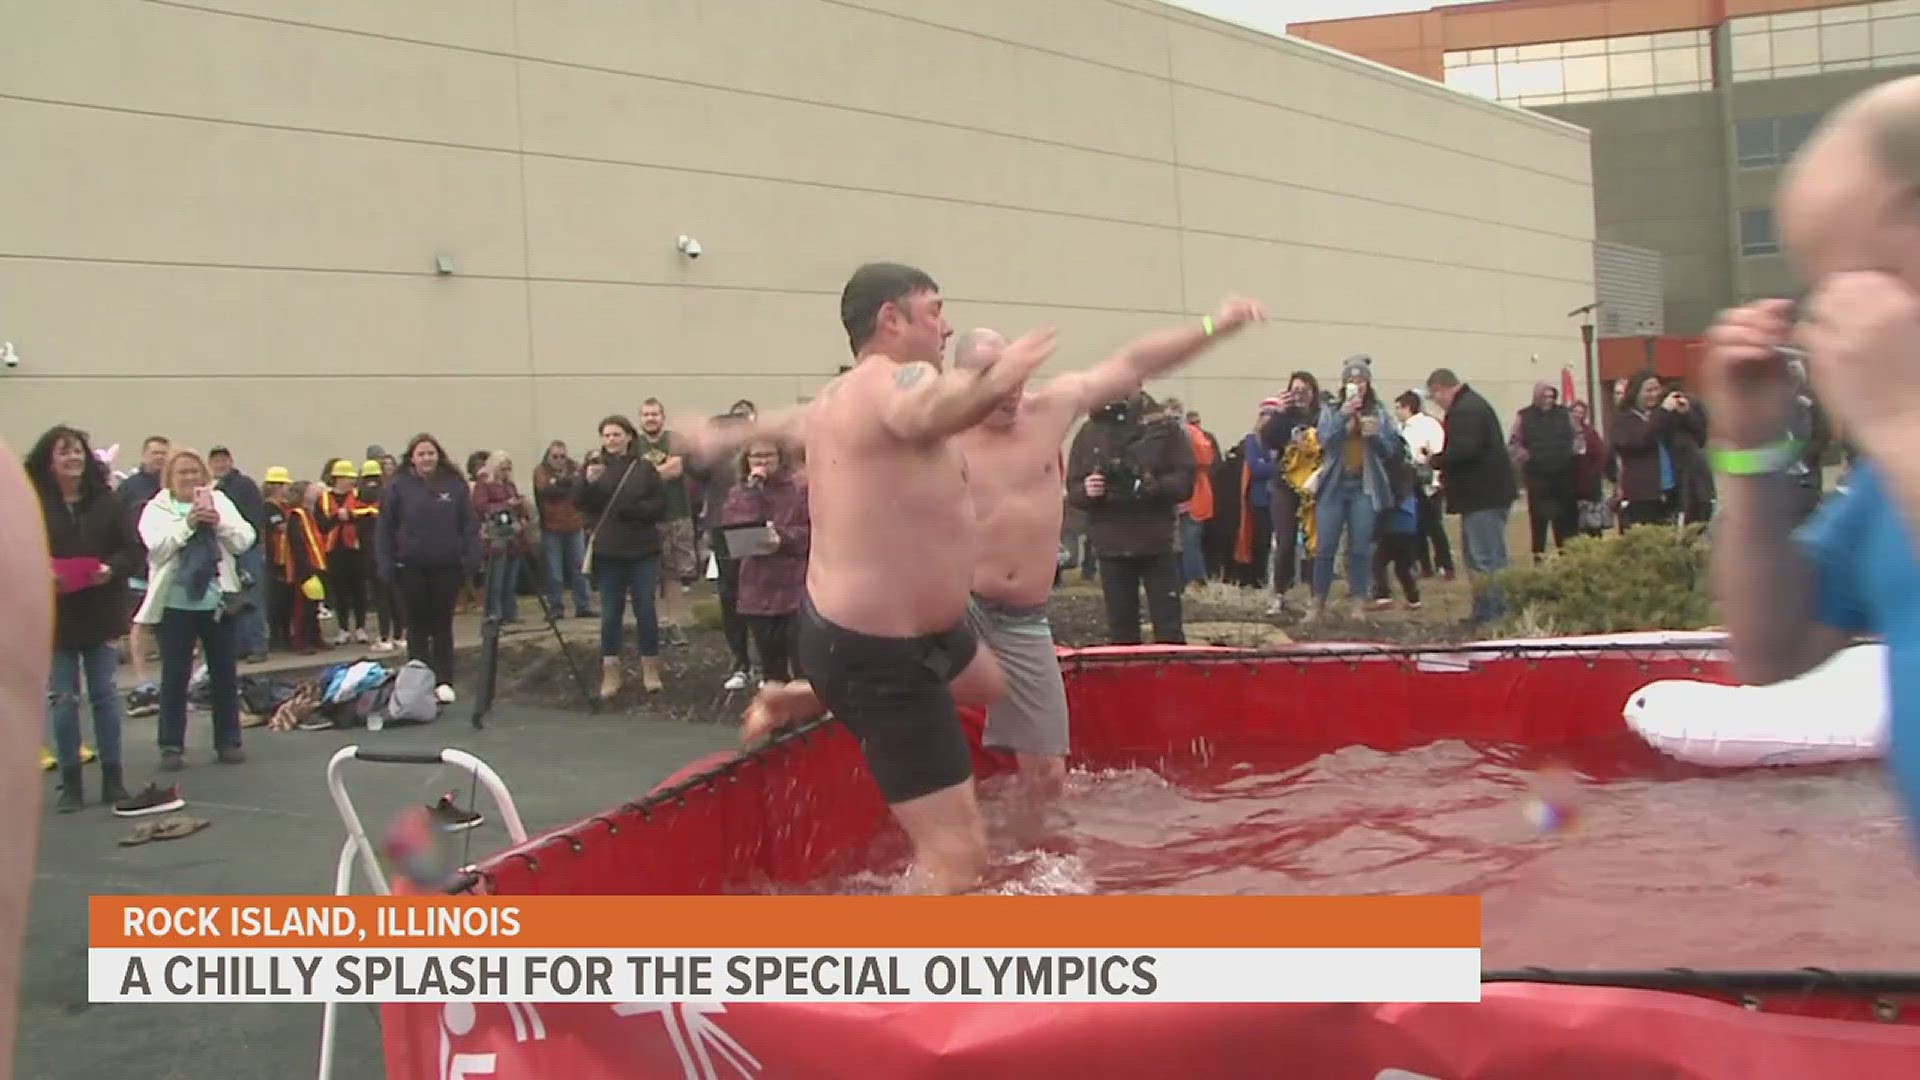 The money raised will support more than 800 Special Olympics athletes in Illinois.